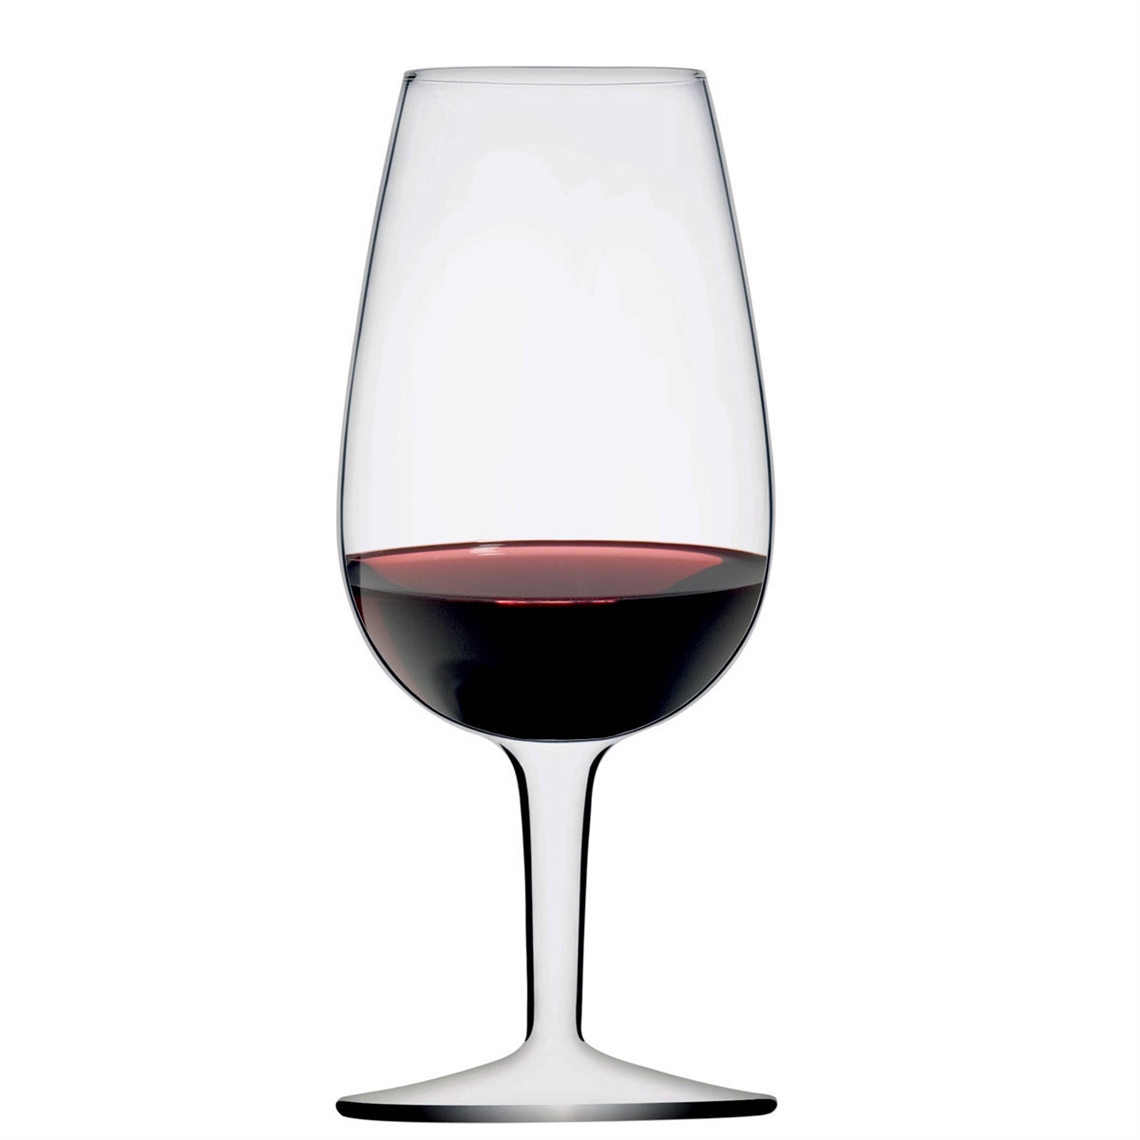 View more riedel from our Wine Tasting Glasses range